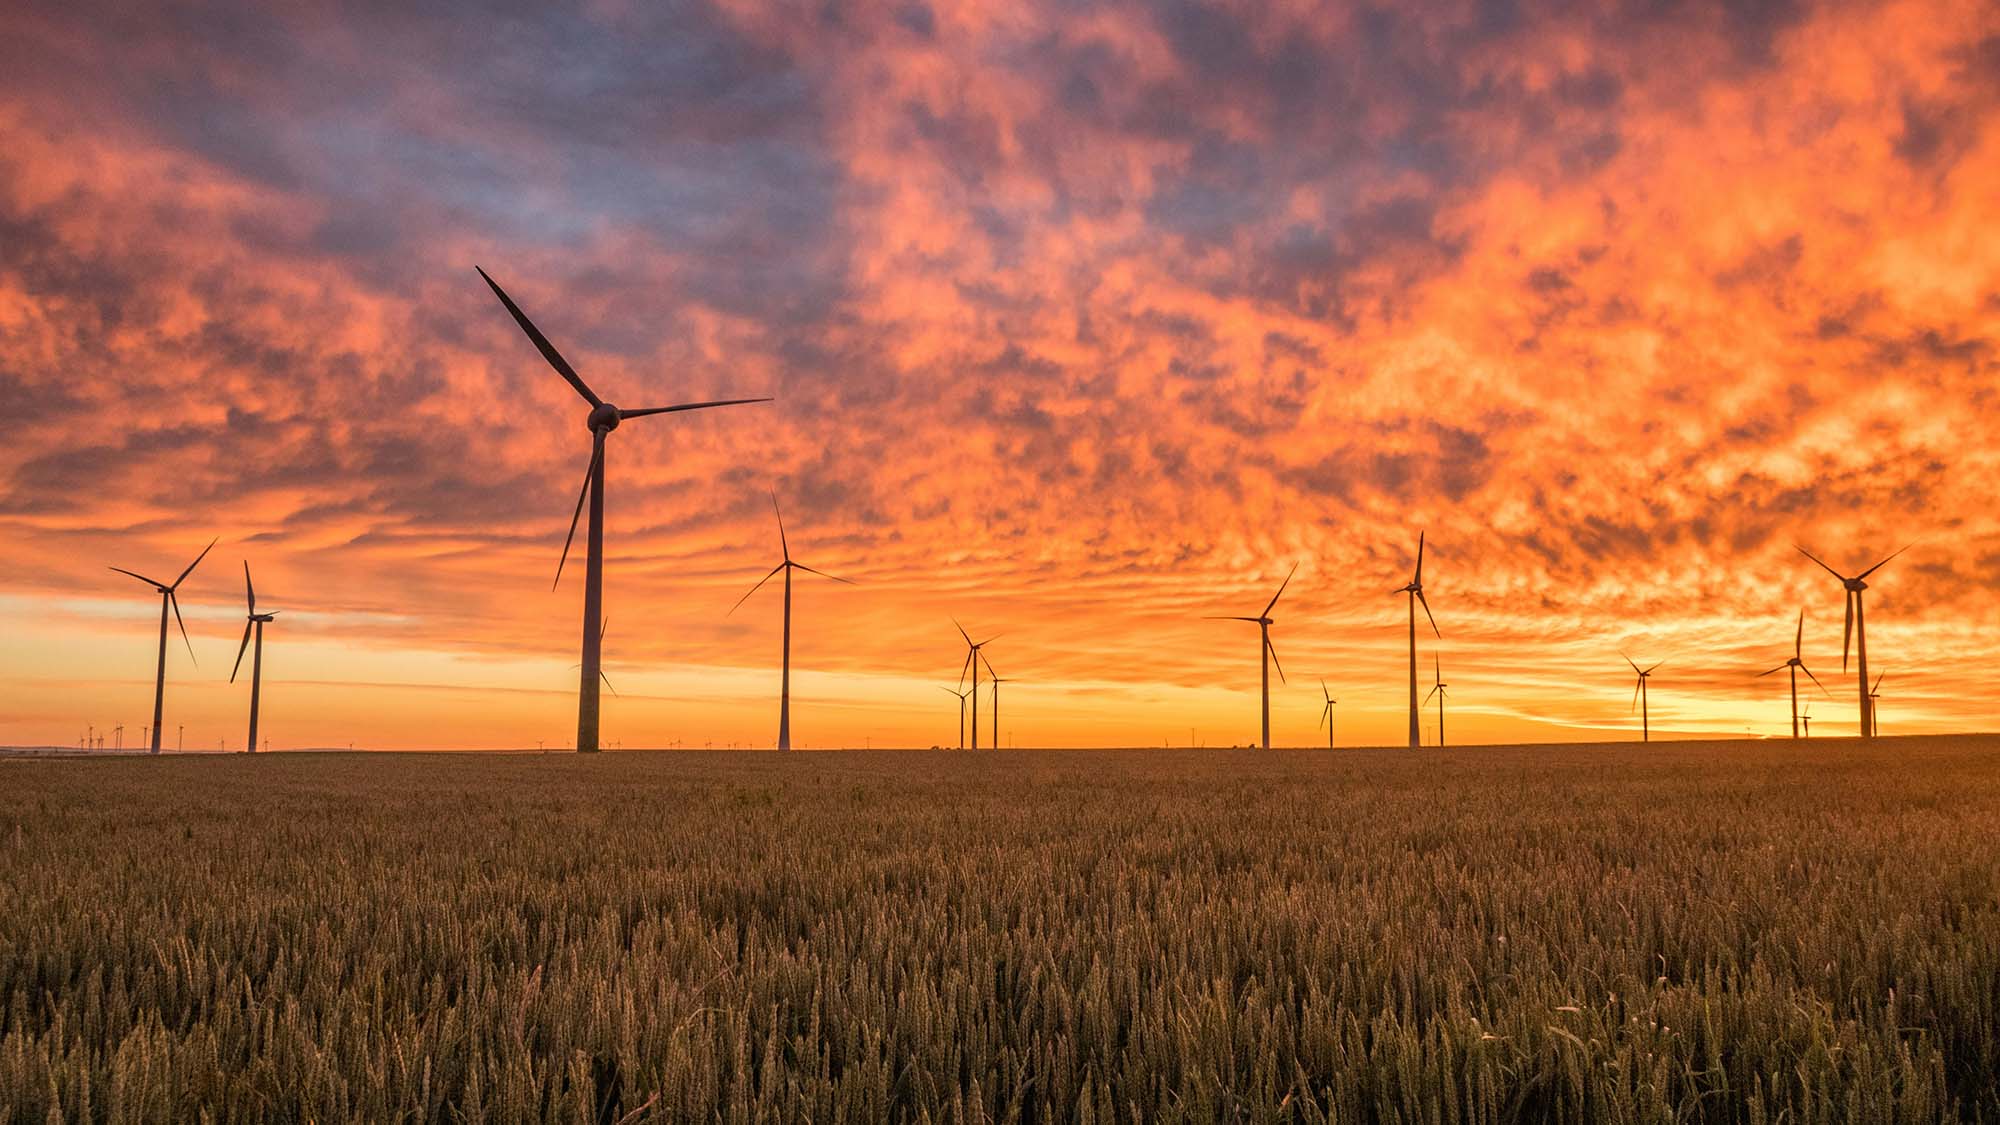 A gorgeous orange-hued sunset shines on a ripe wheat field peppered with renewable energy-producing wind turbines.